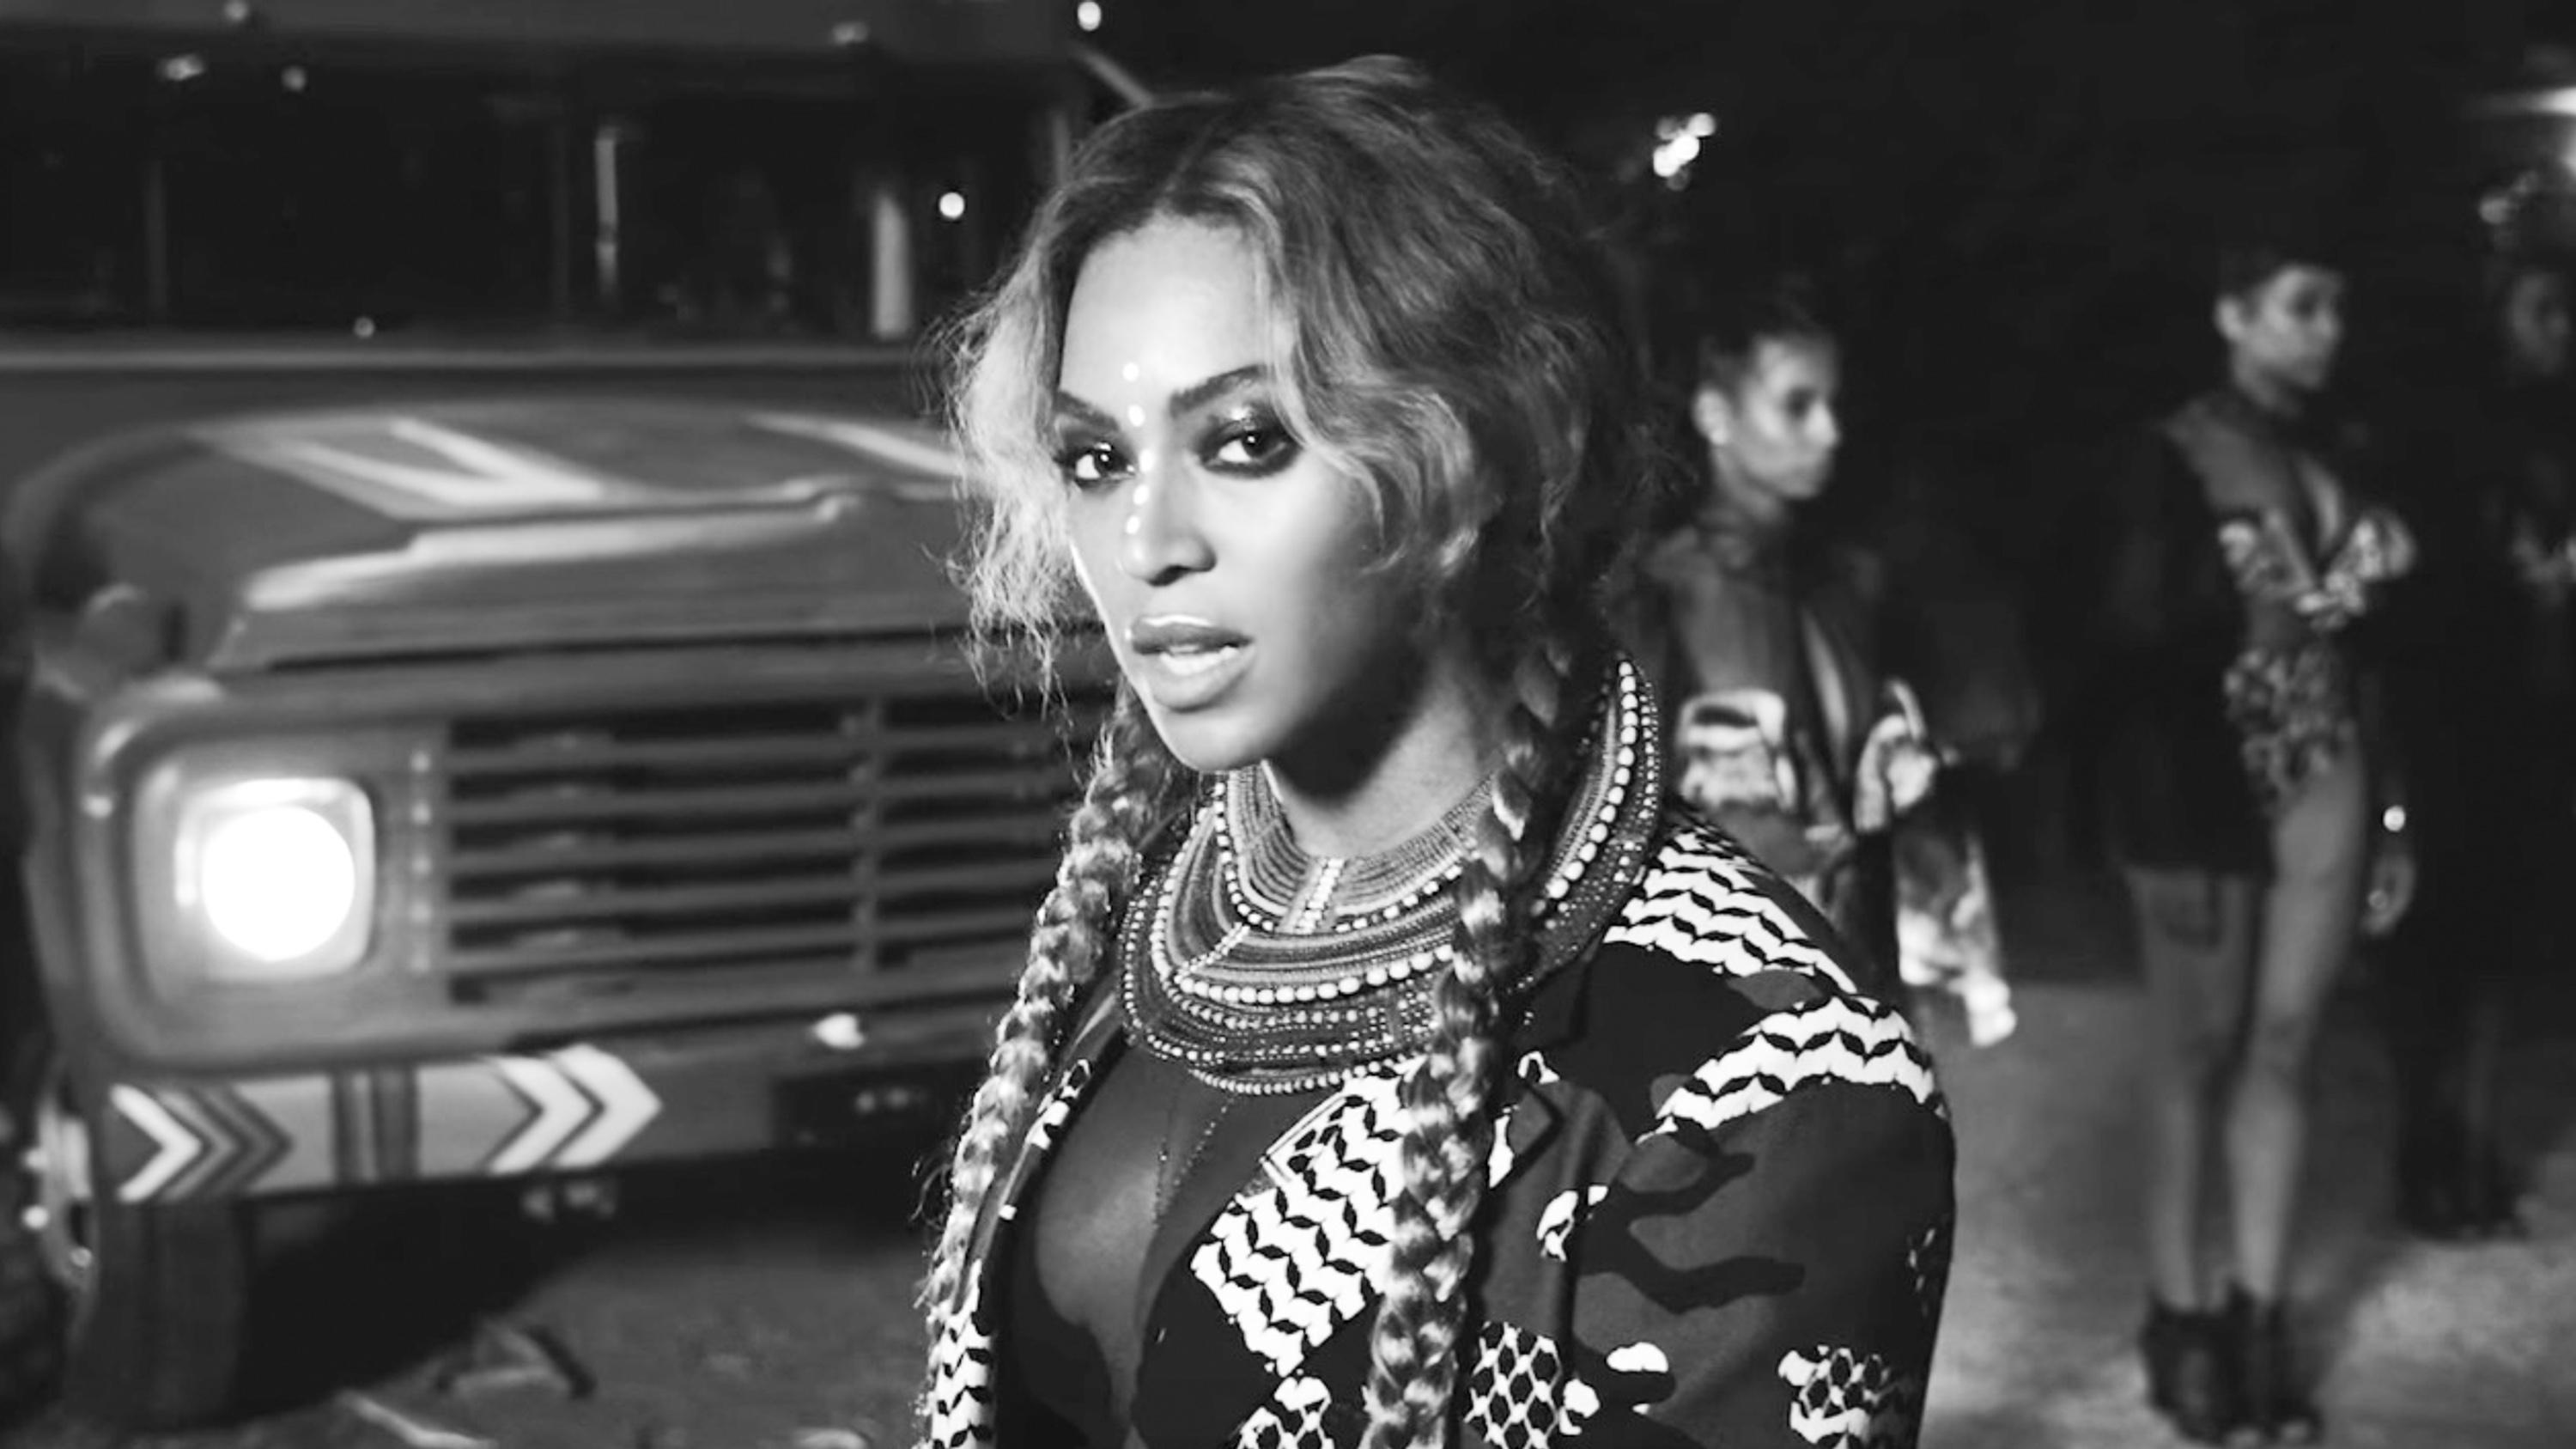 Beyoncé Released 'Sorry' Demo and the Beyhive is Swarming